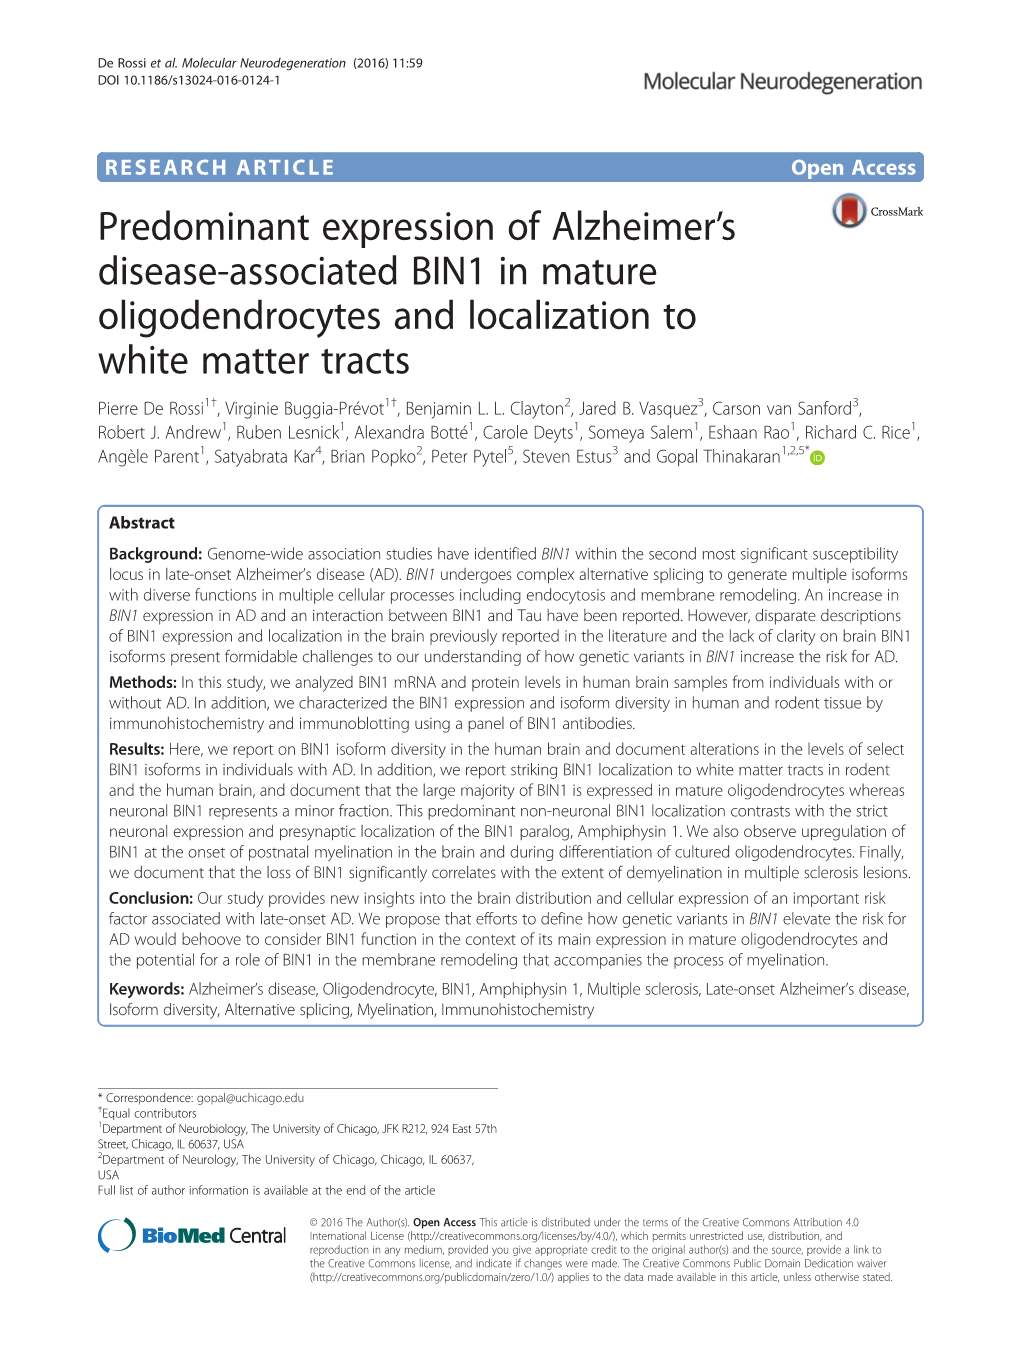 Predominant Expression of Alzheimer's Disease-Associated